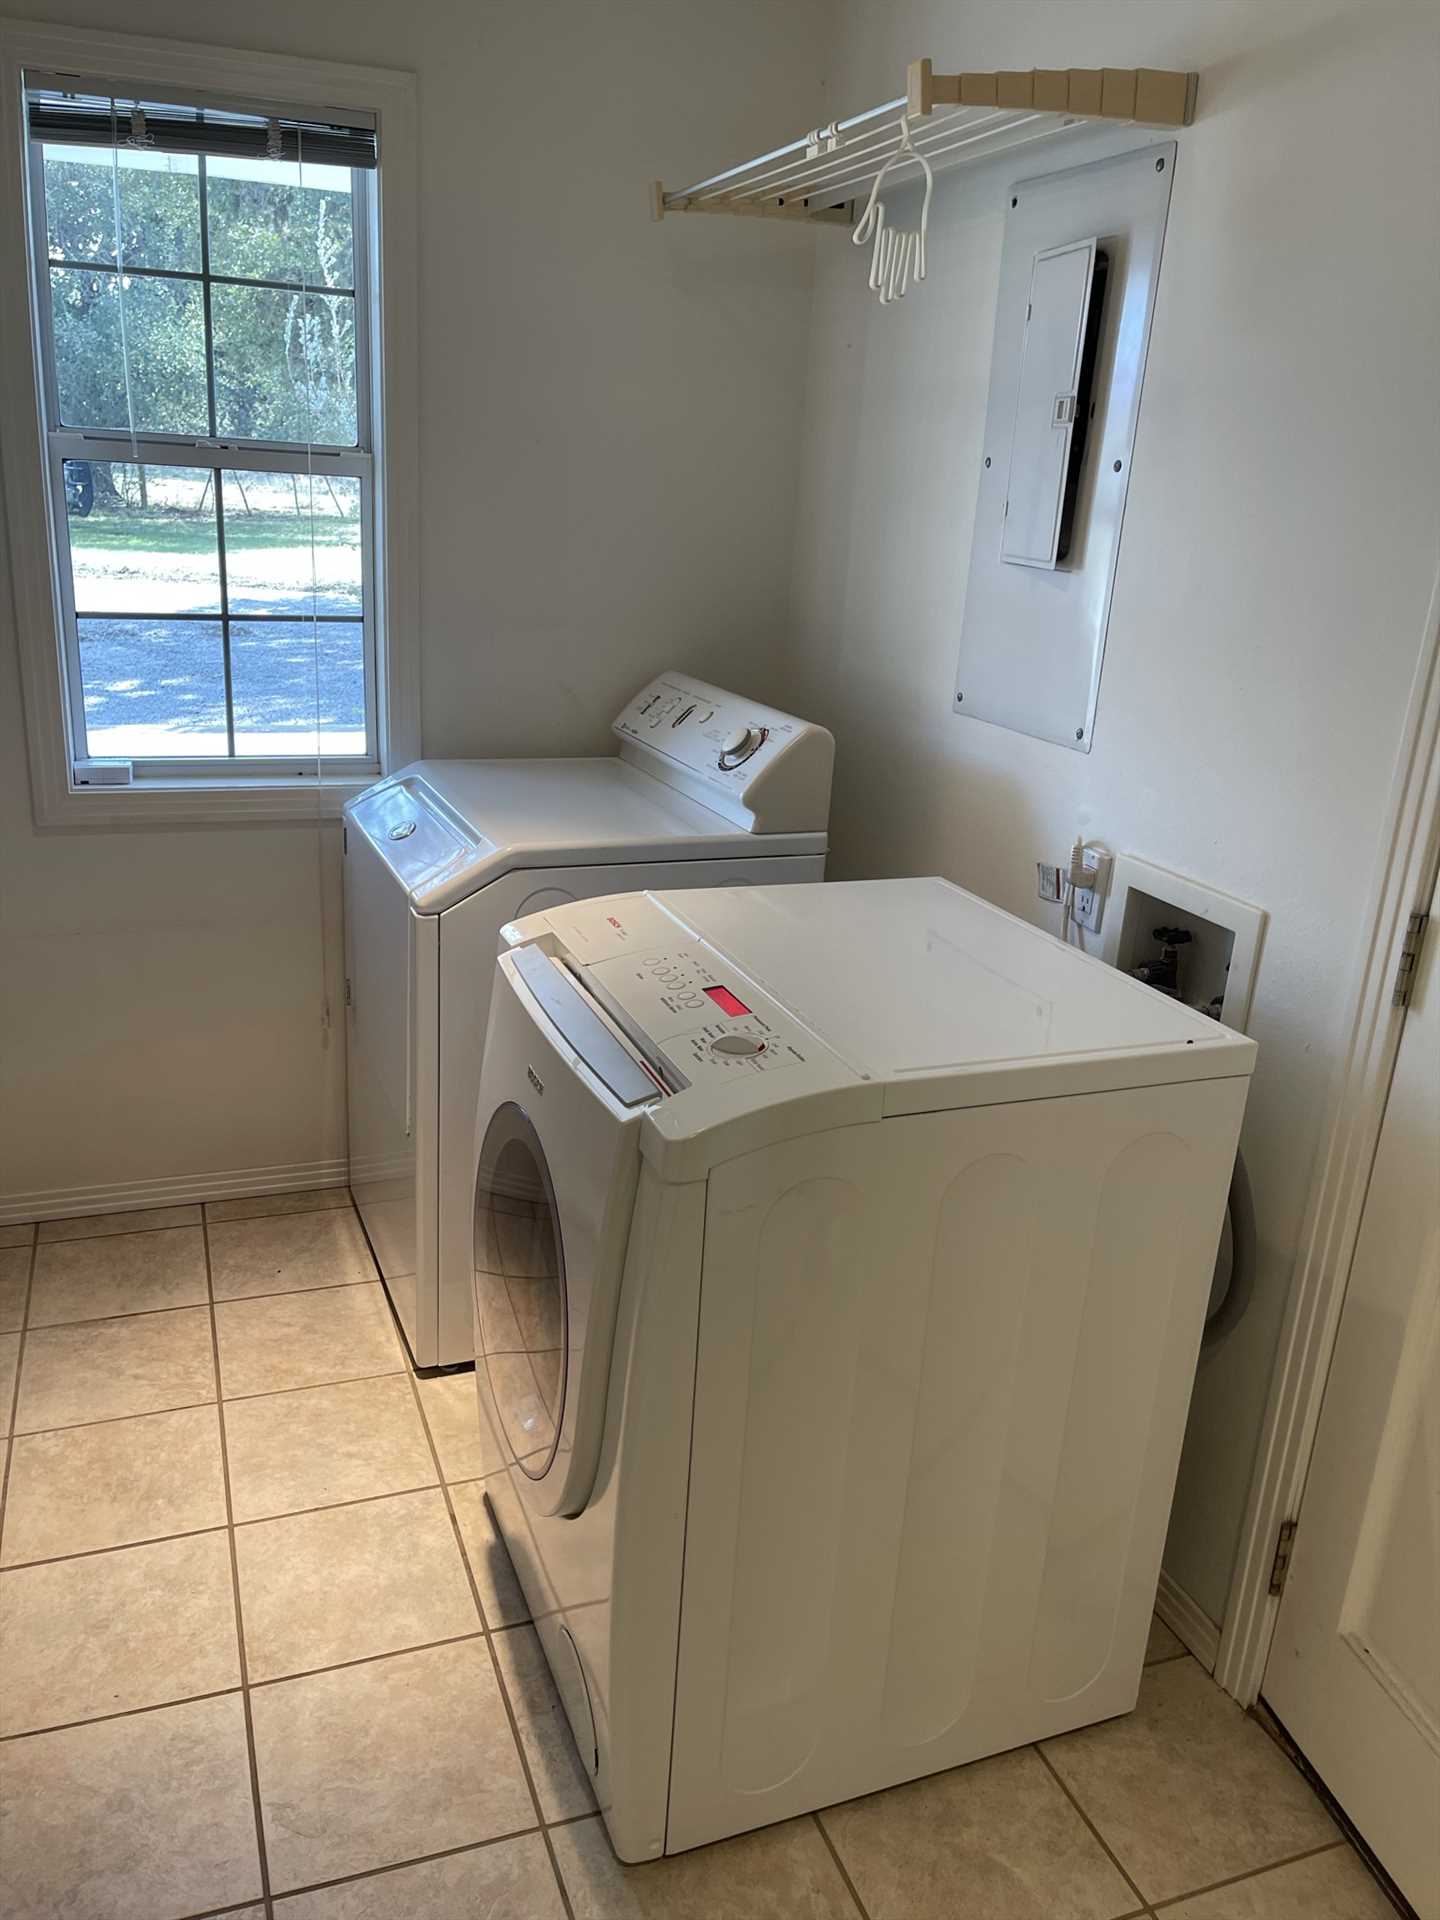                                                 No need to take home dirty laundry! You'll have a utility room with a washer and dryer combo here.